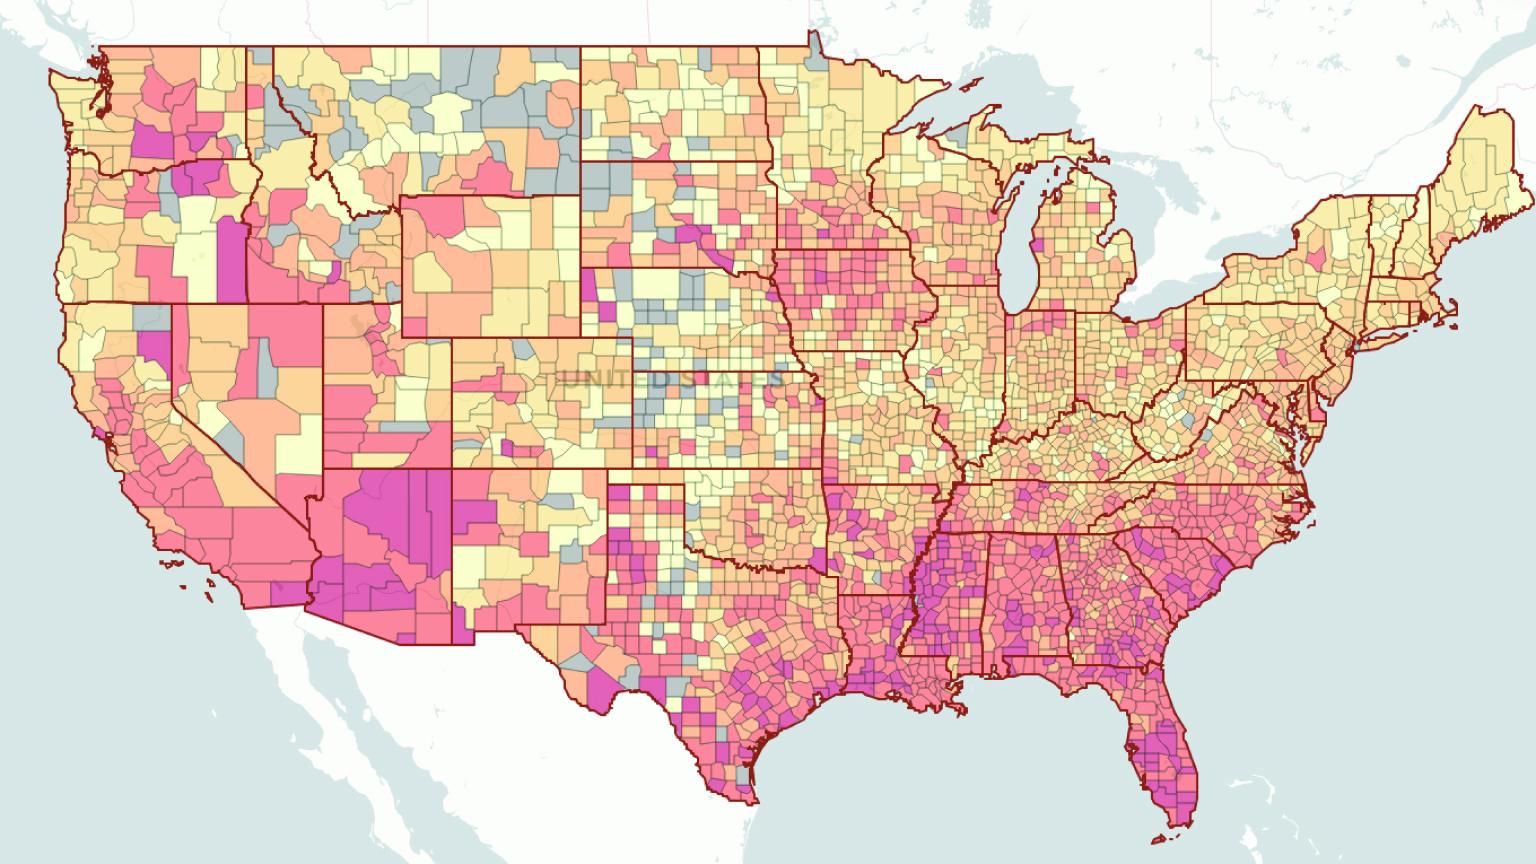 The map of USA by county-level risk with the risk calculator applied